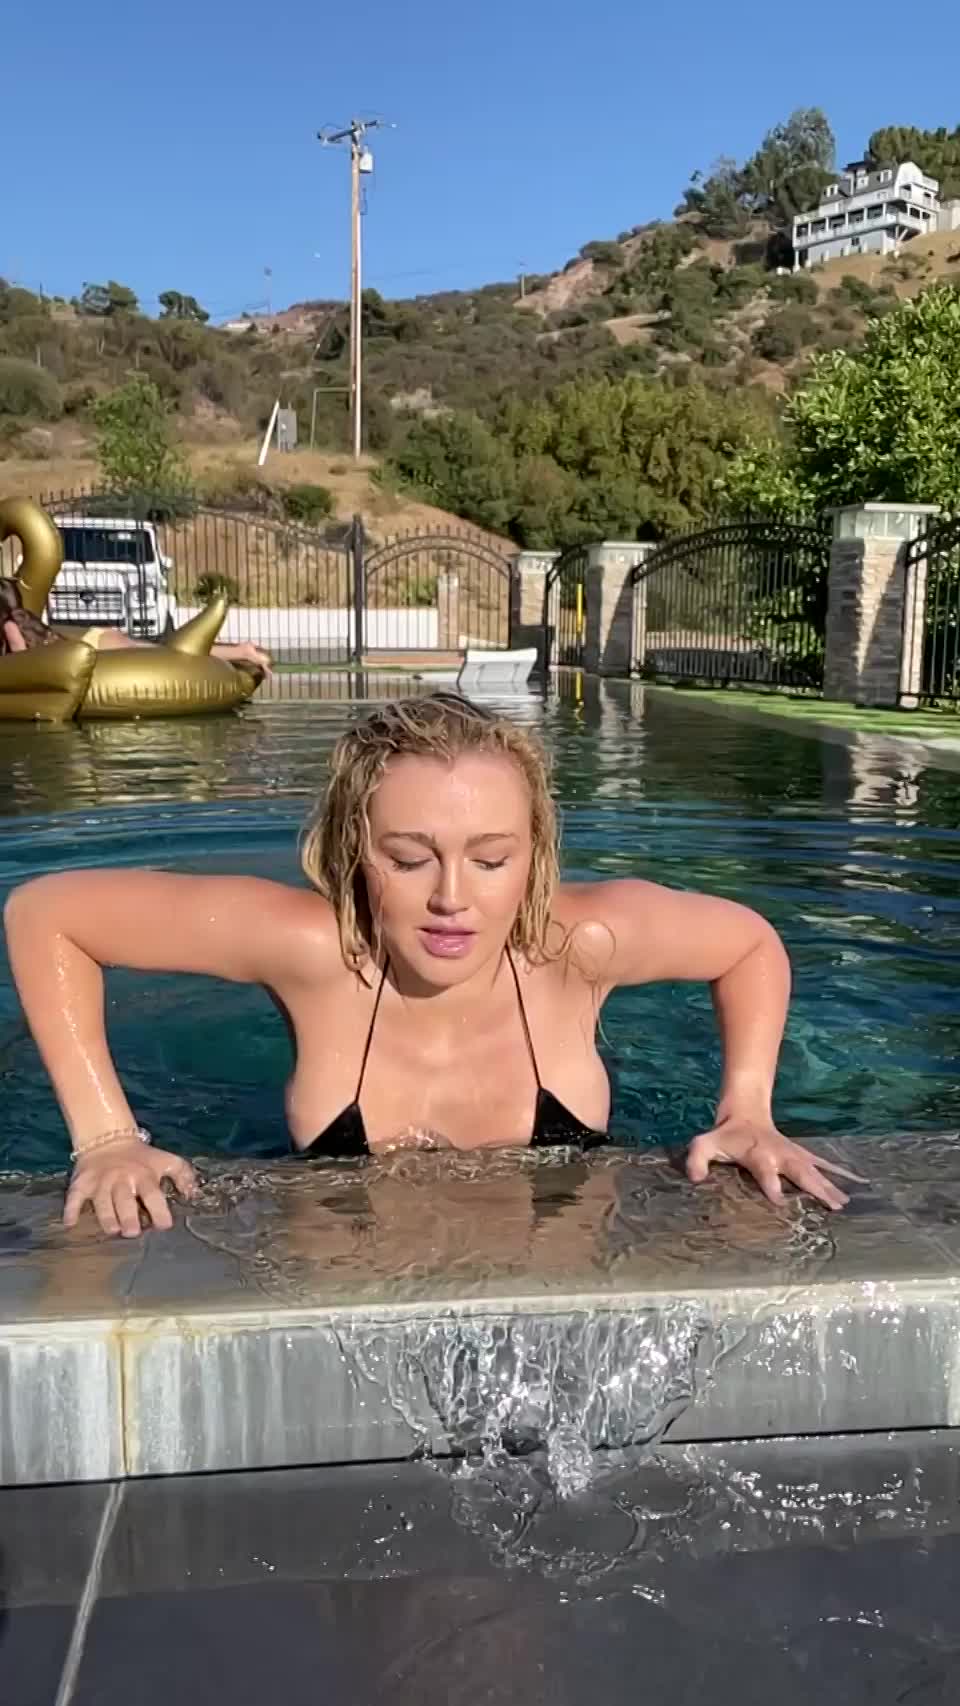 watch me get out of the pool : video clip